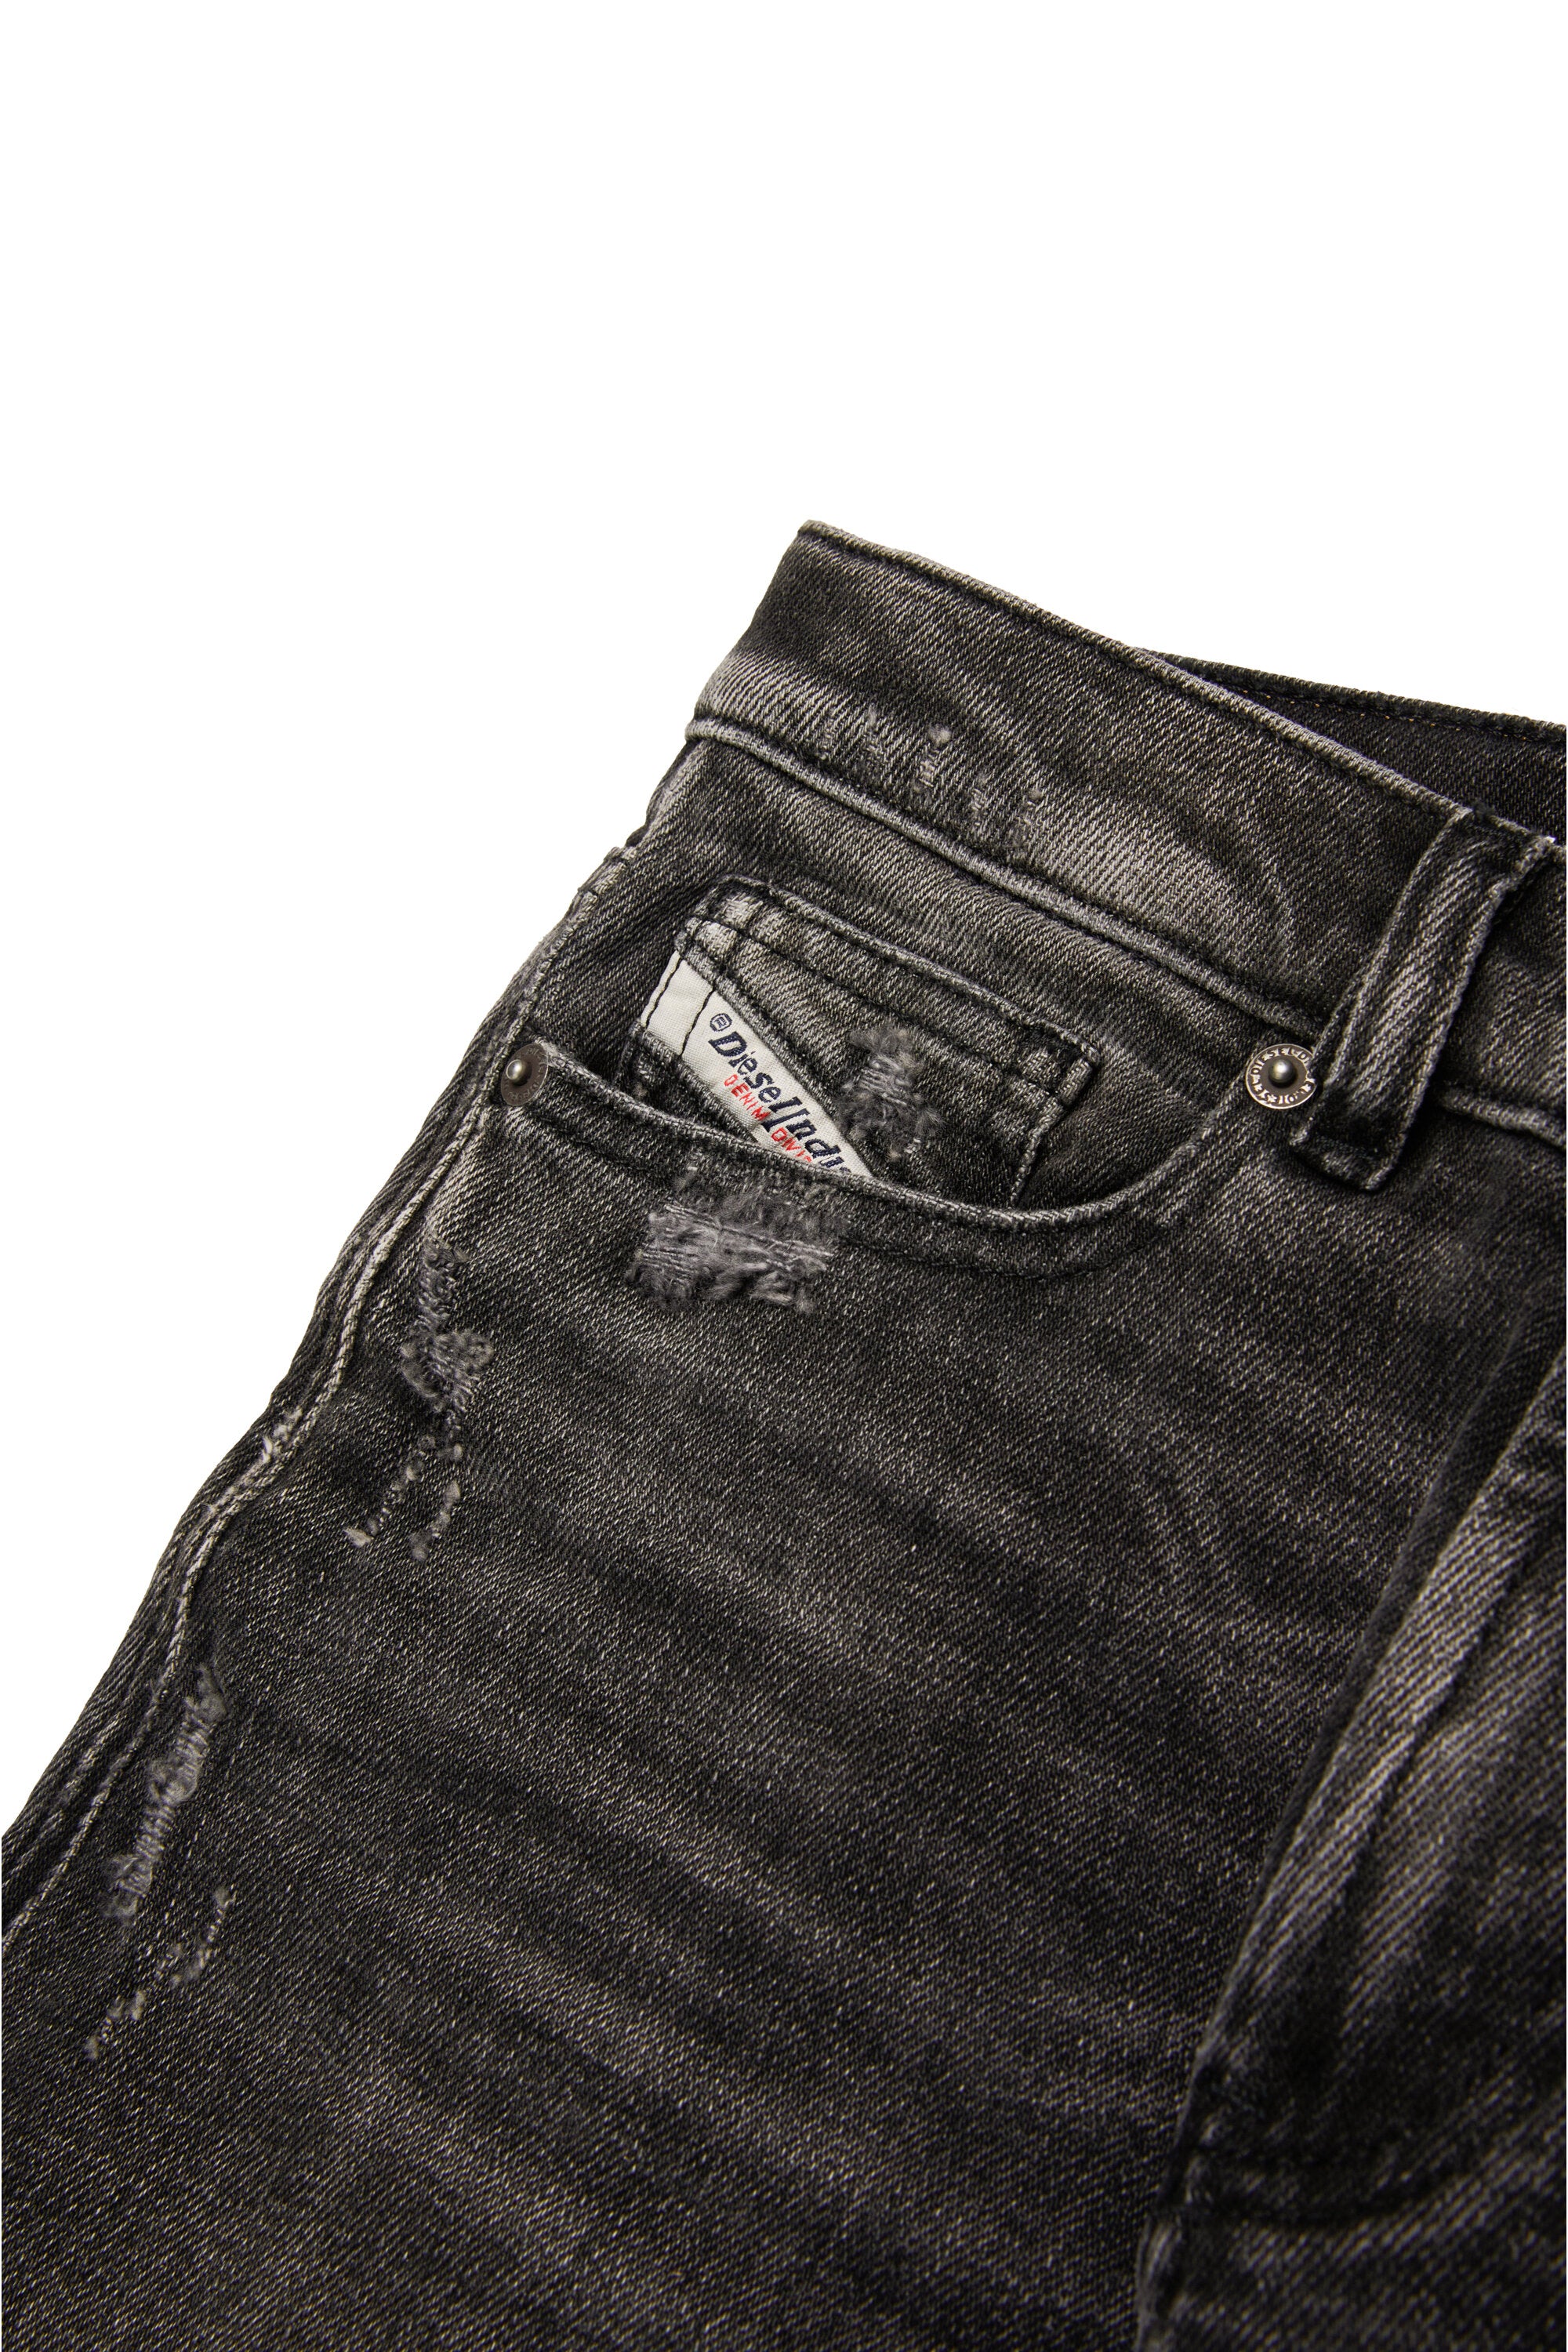 Black straight jeans with abrasions - 2010